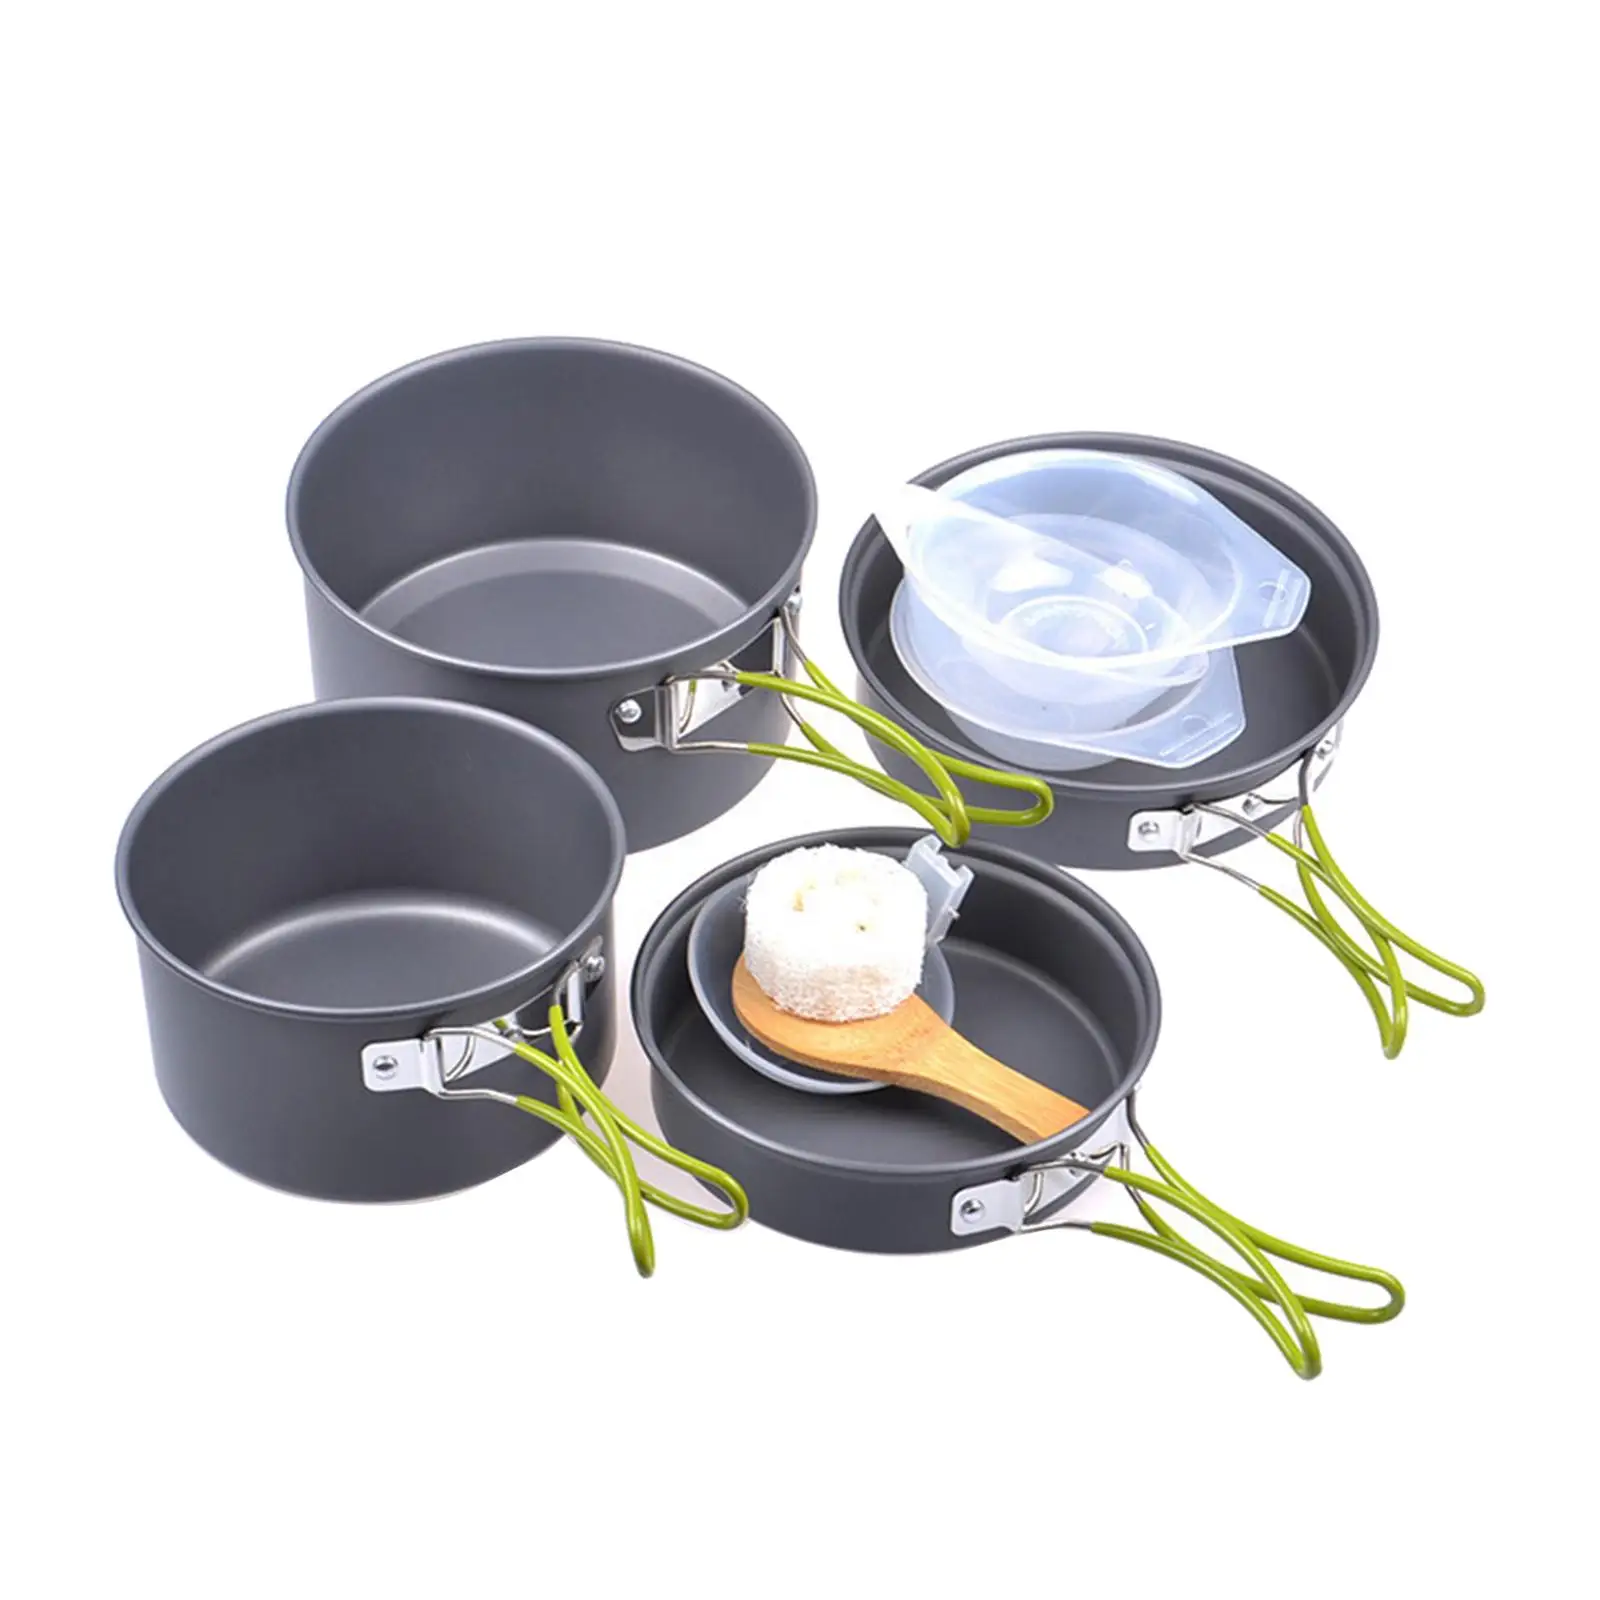 Outdoor Camping Cookware Mess Kit Hiking Nonstick Cooking  Plate Set